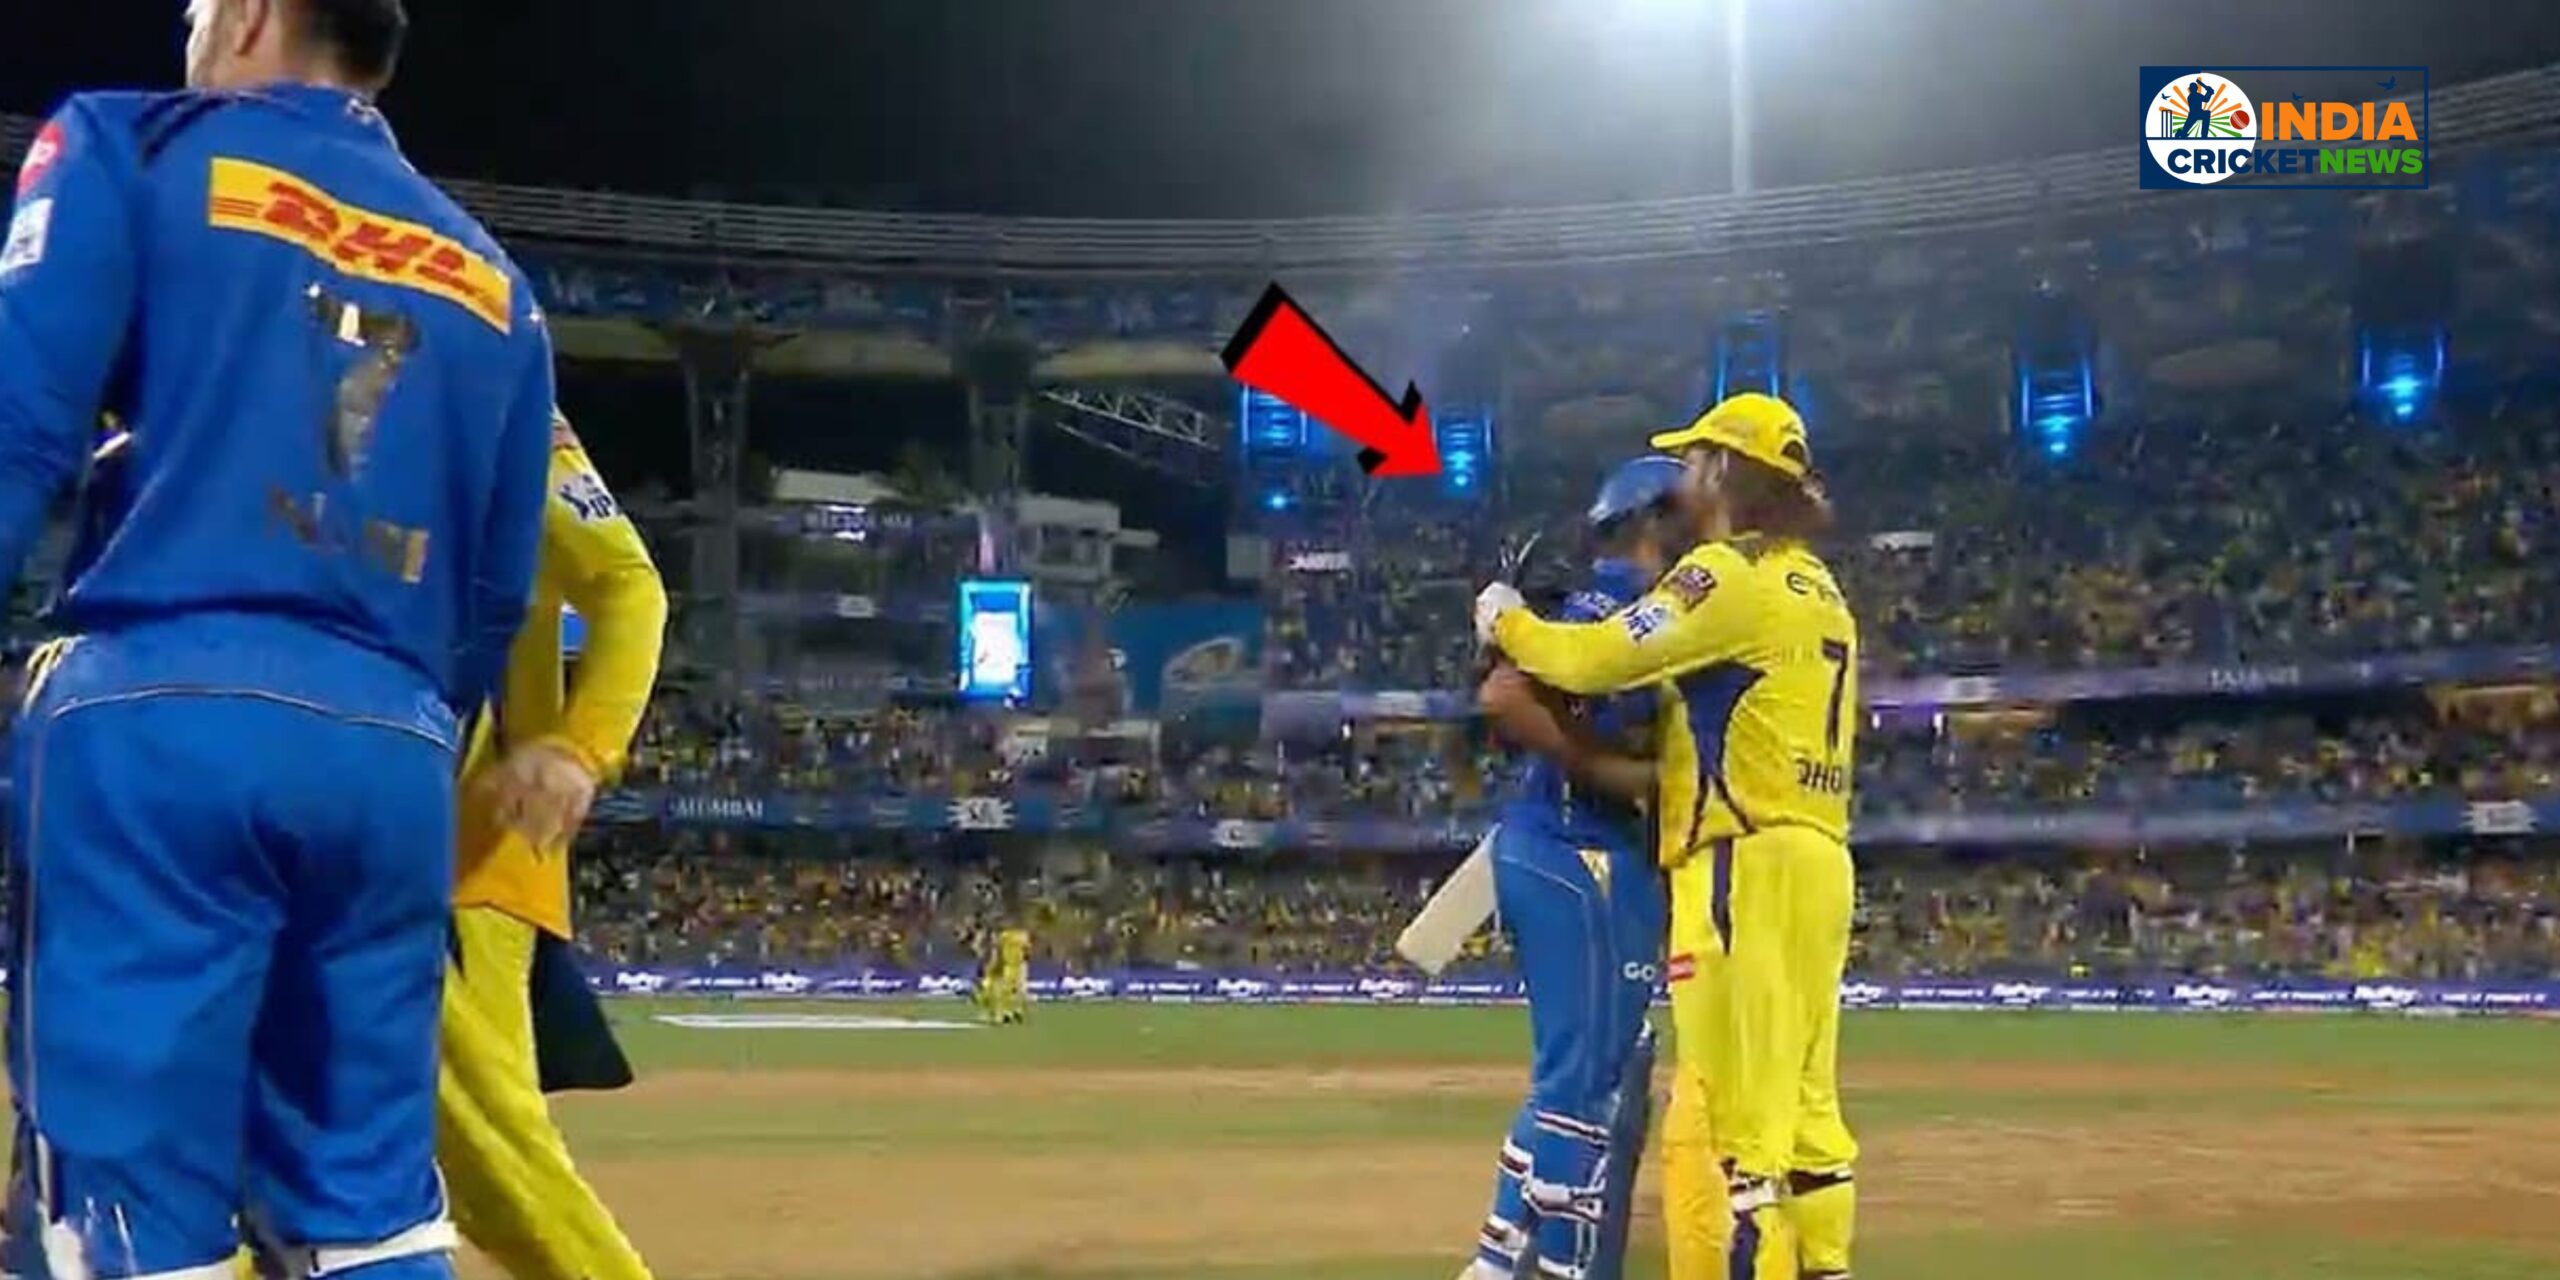 The picture of that MS Dhoni-Rohit Sharma moment went instantly viral on social media.